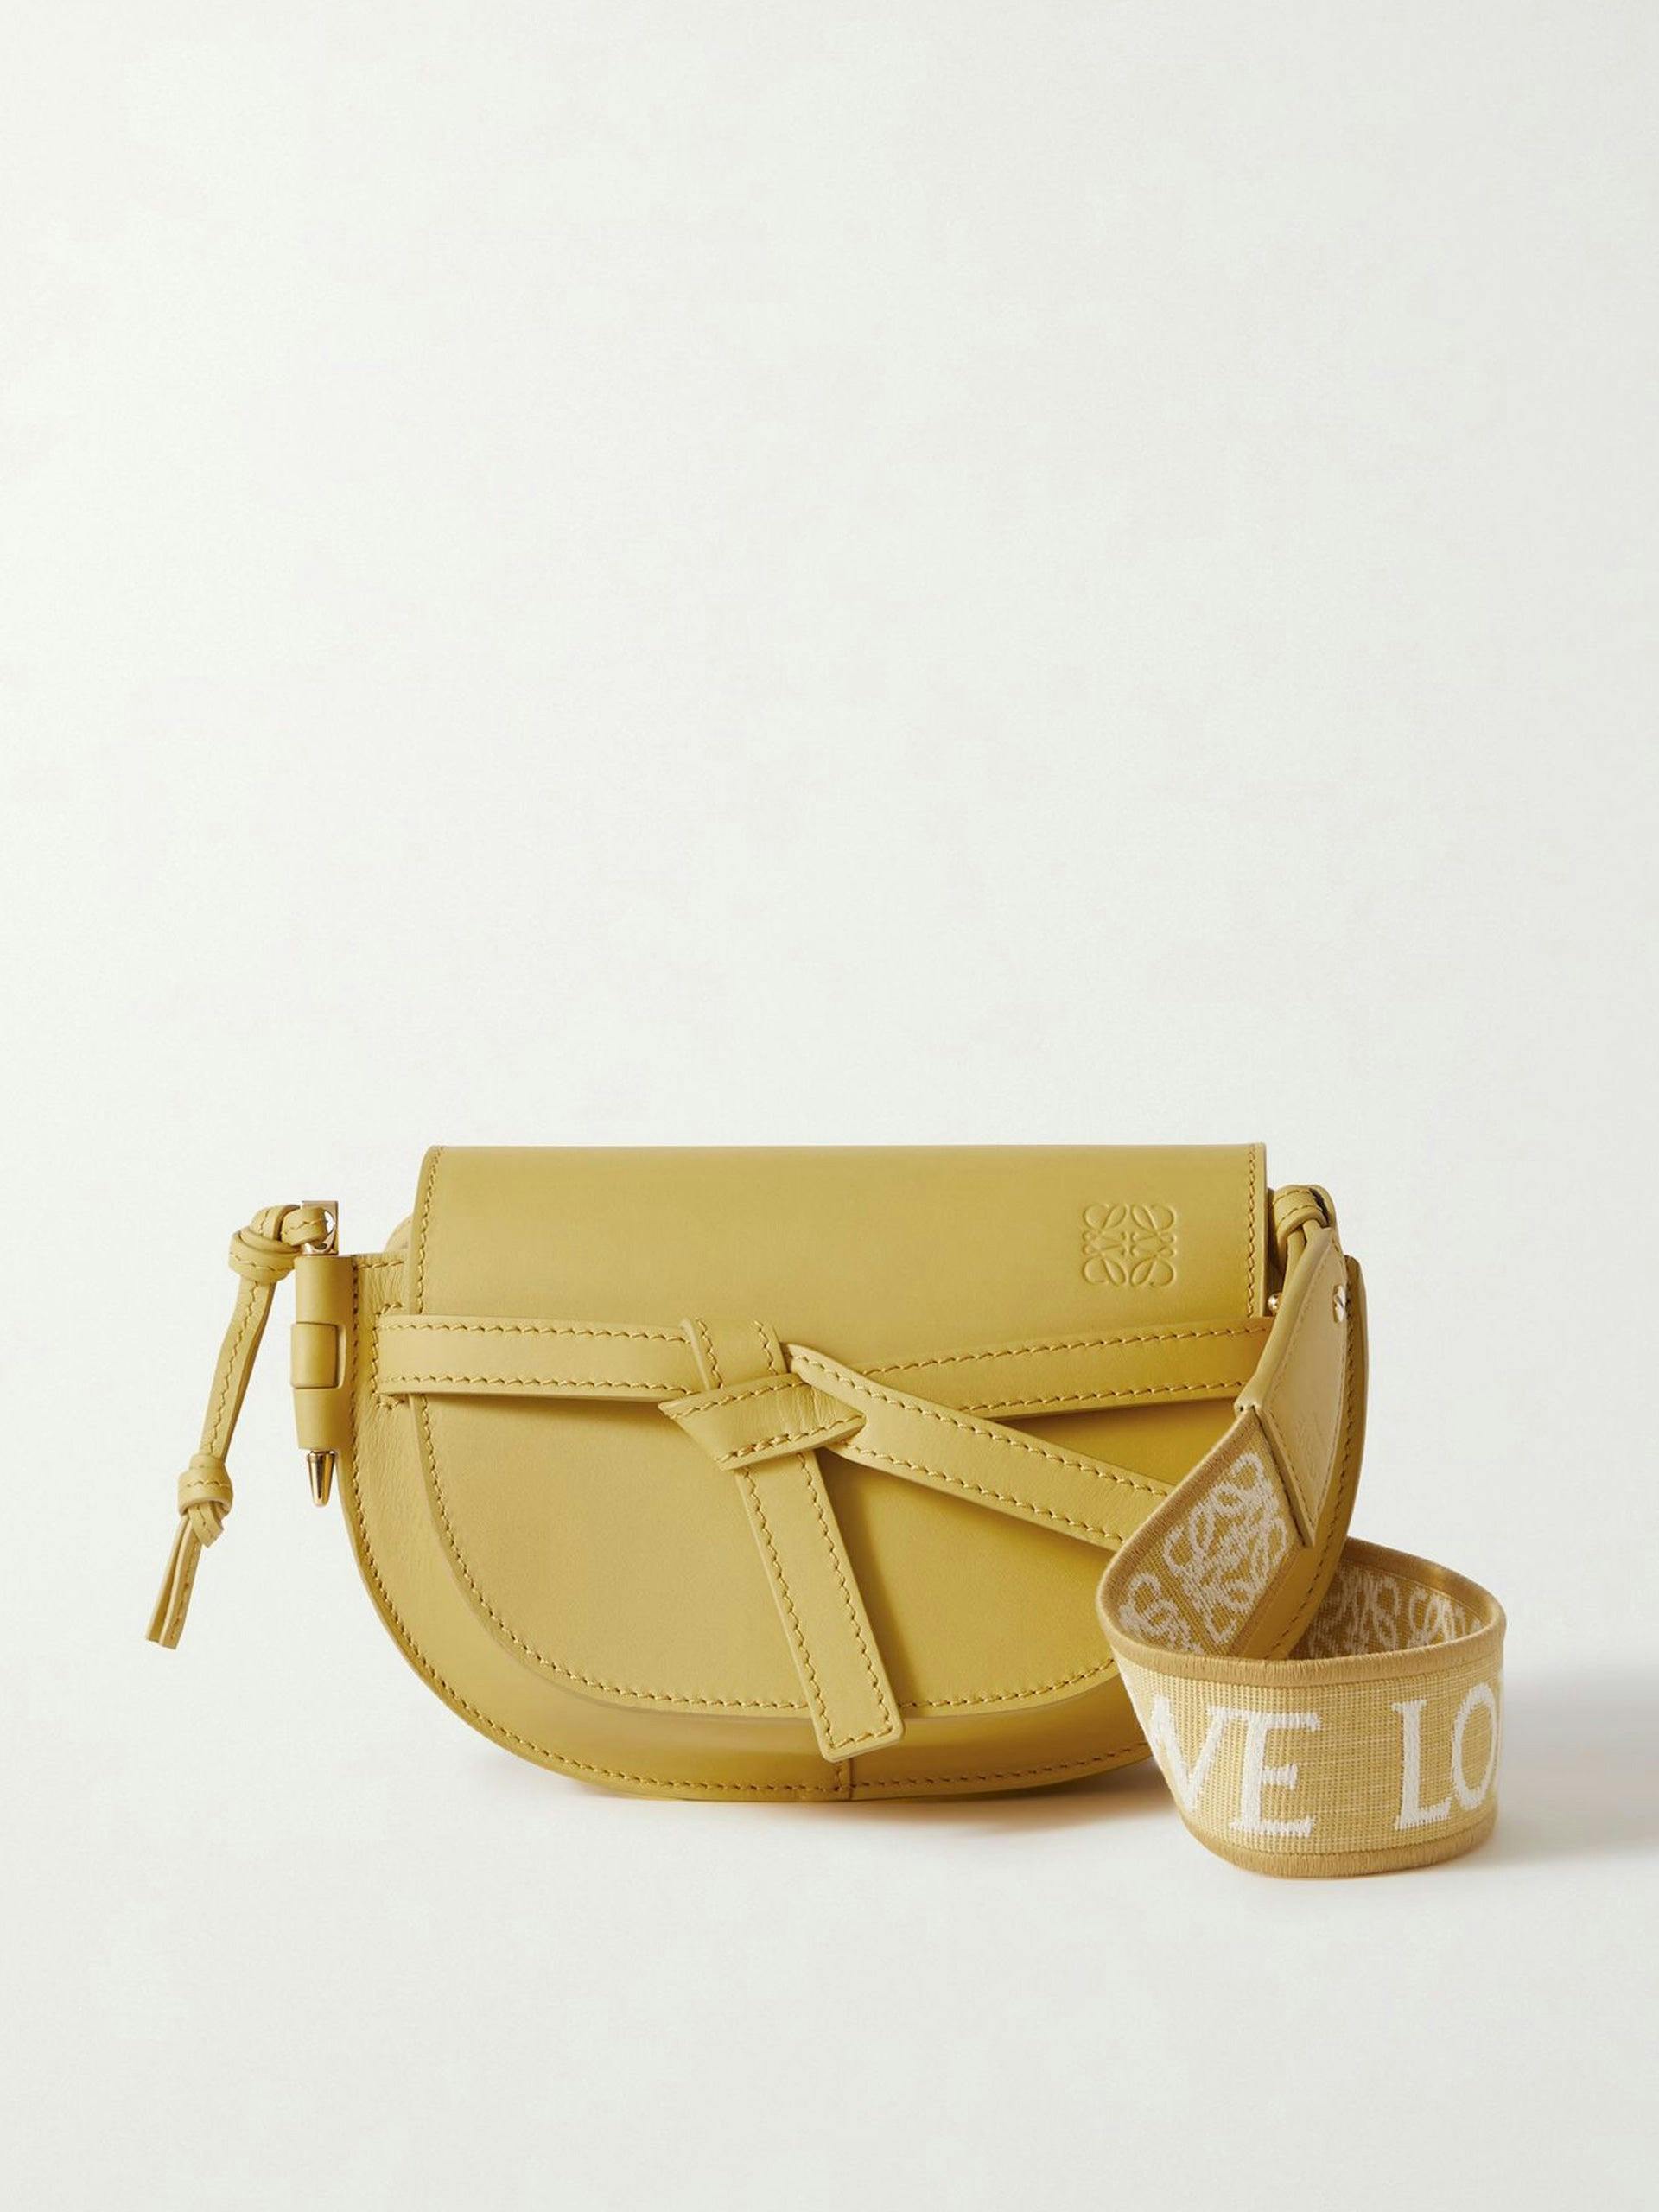 Yellow leather crossbody and canvas bag